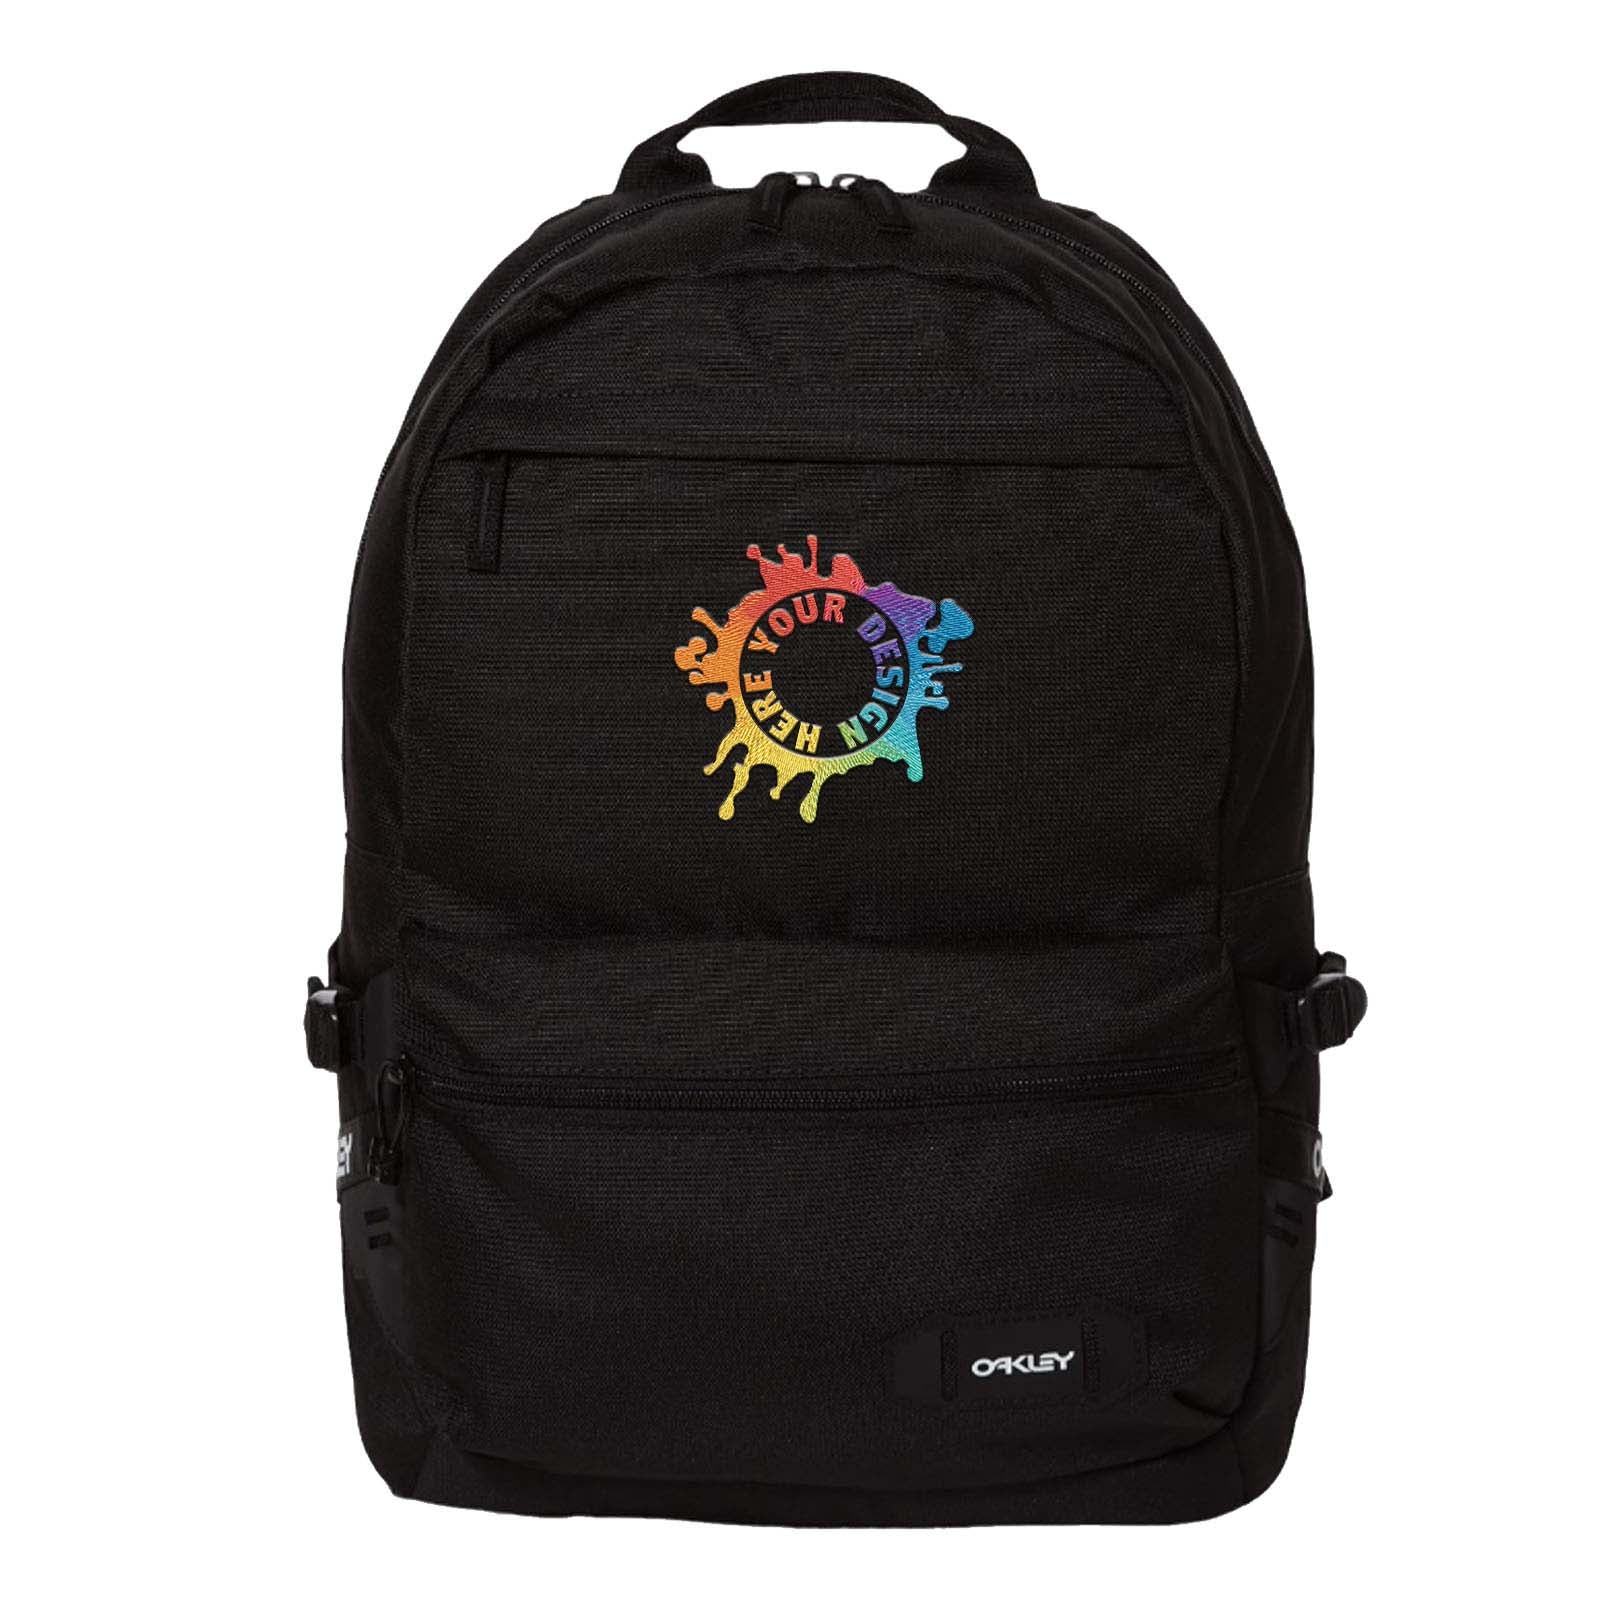 Oakley 20L Street Backpack Embroidery - Mato & Hash